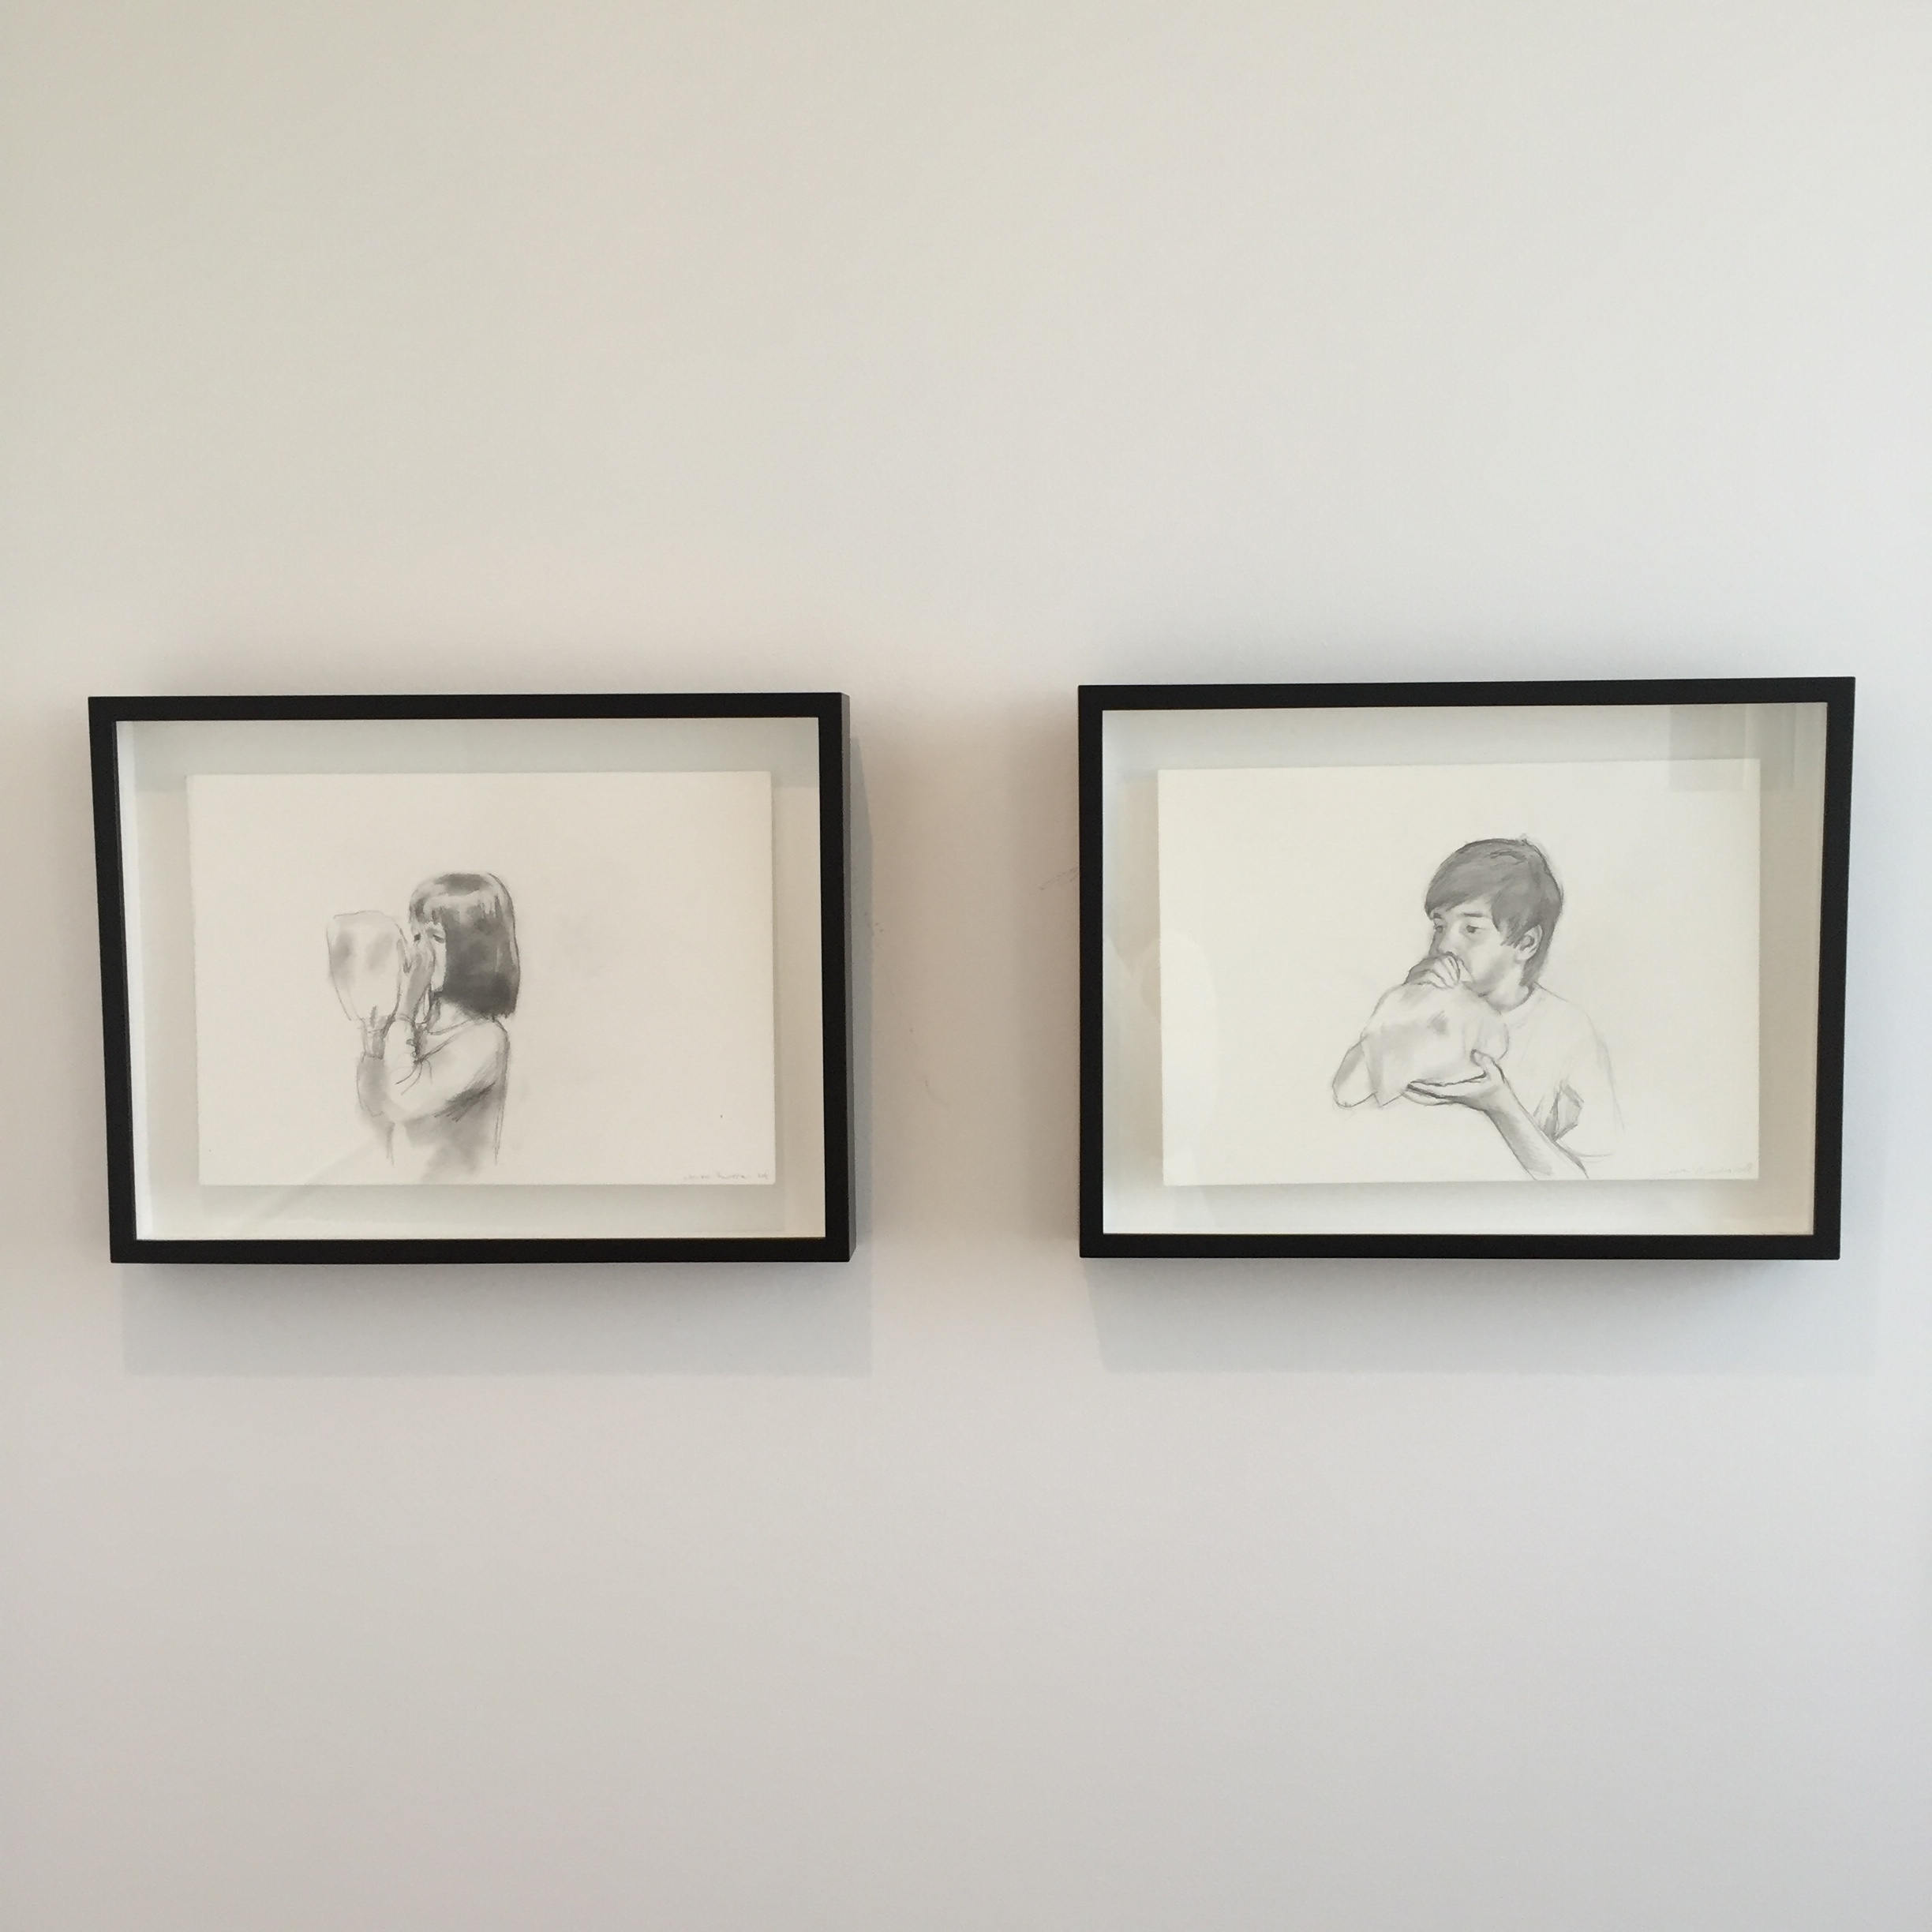  "Untitled (Pioneers)" (2008)  Graphite on paper  8 x 11.5 in each 